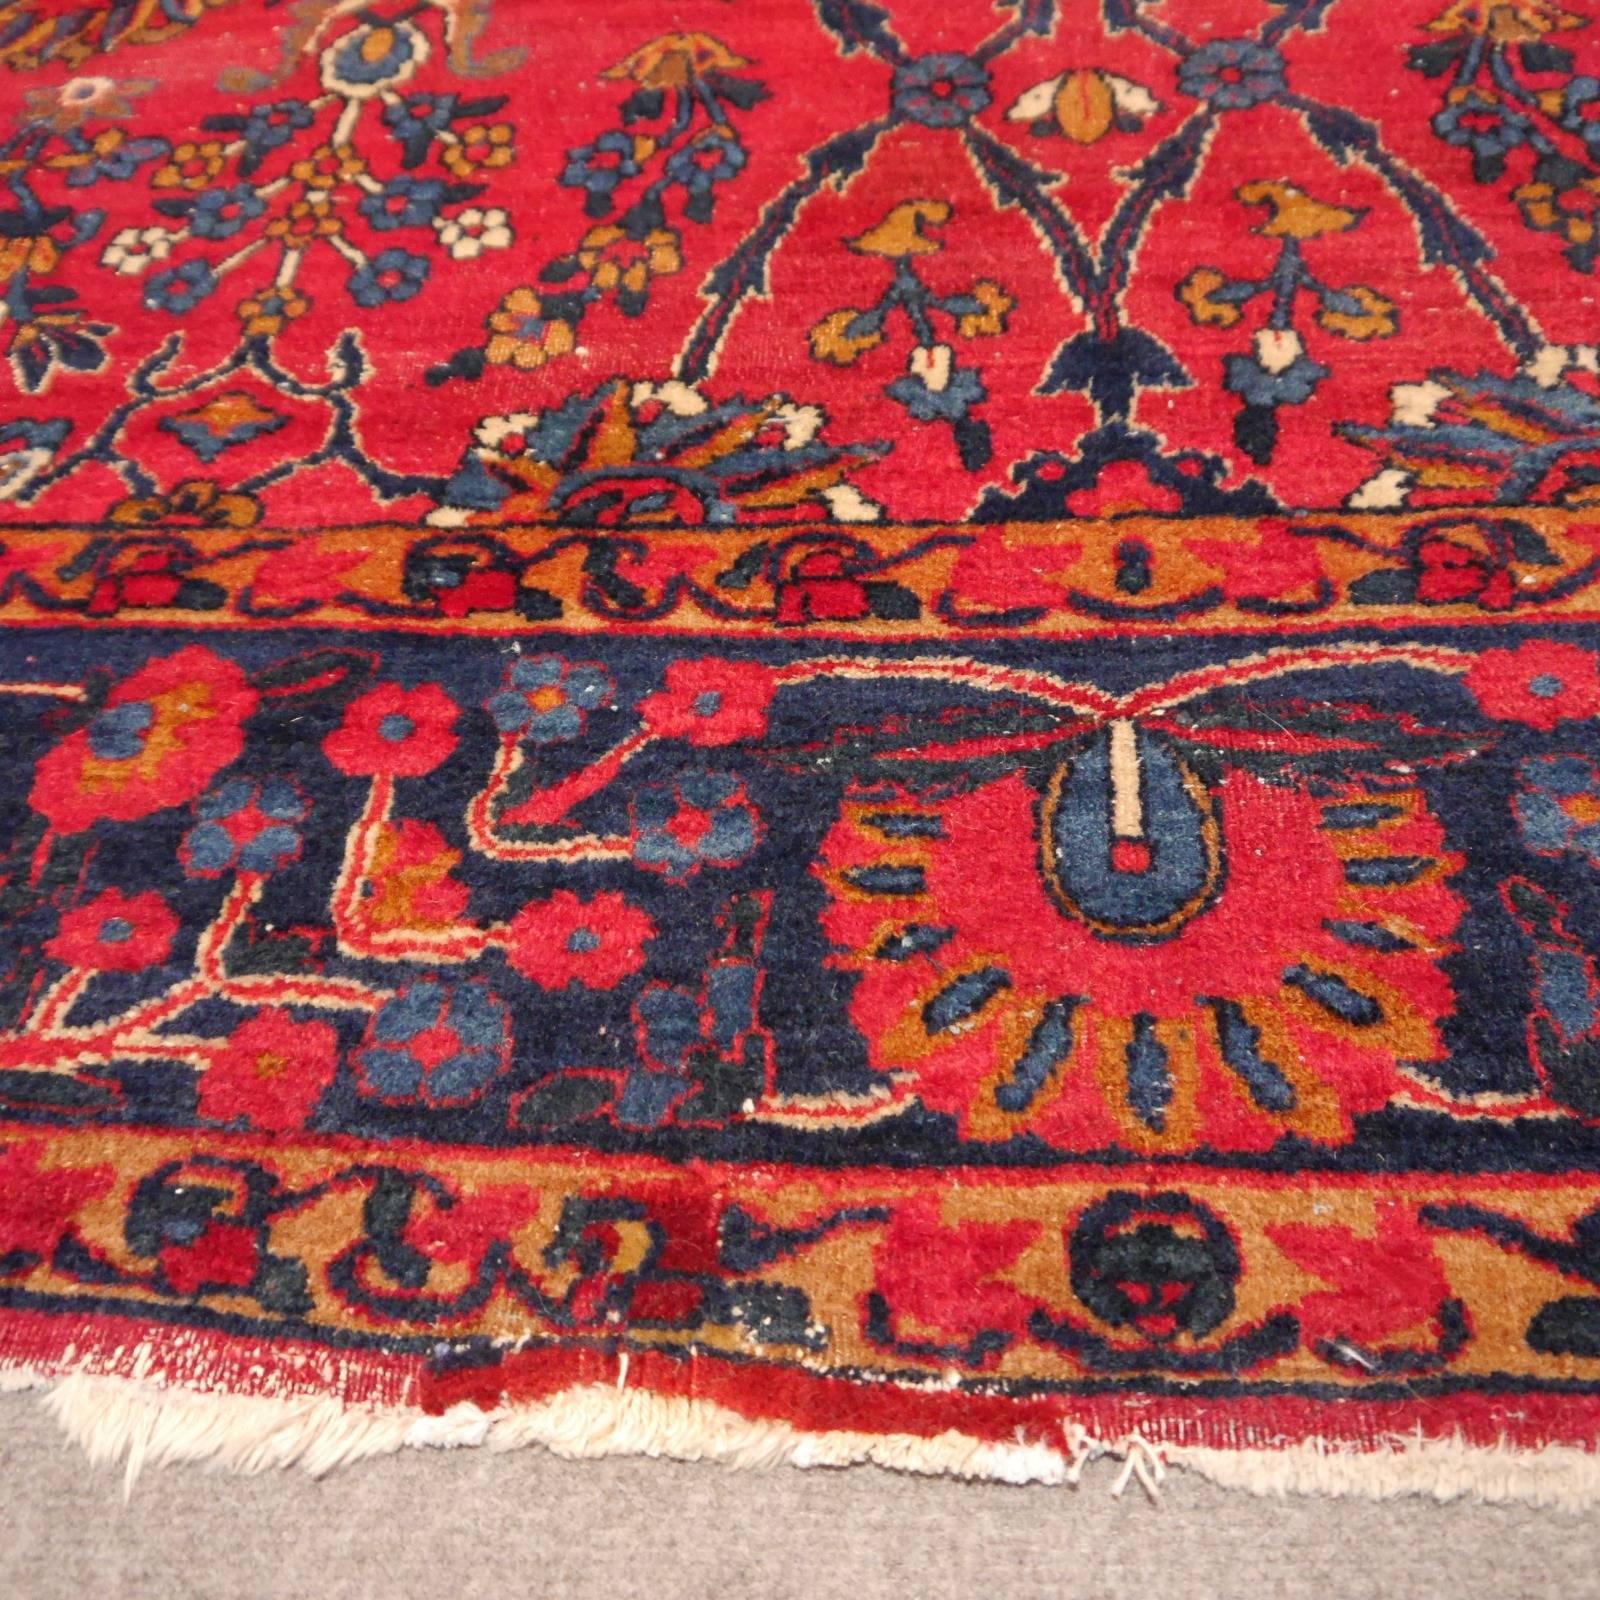 Antique Indian Agra Rug hand knotted red blue gold In Fair Condition For Sale In Lohr, Bavaria, DE